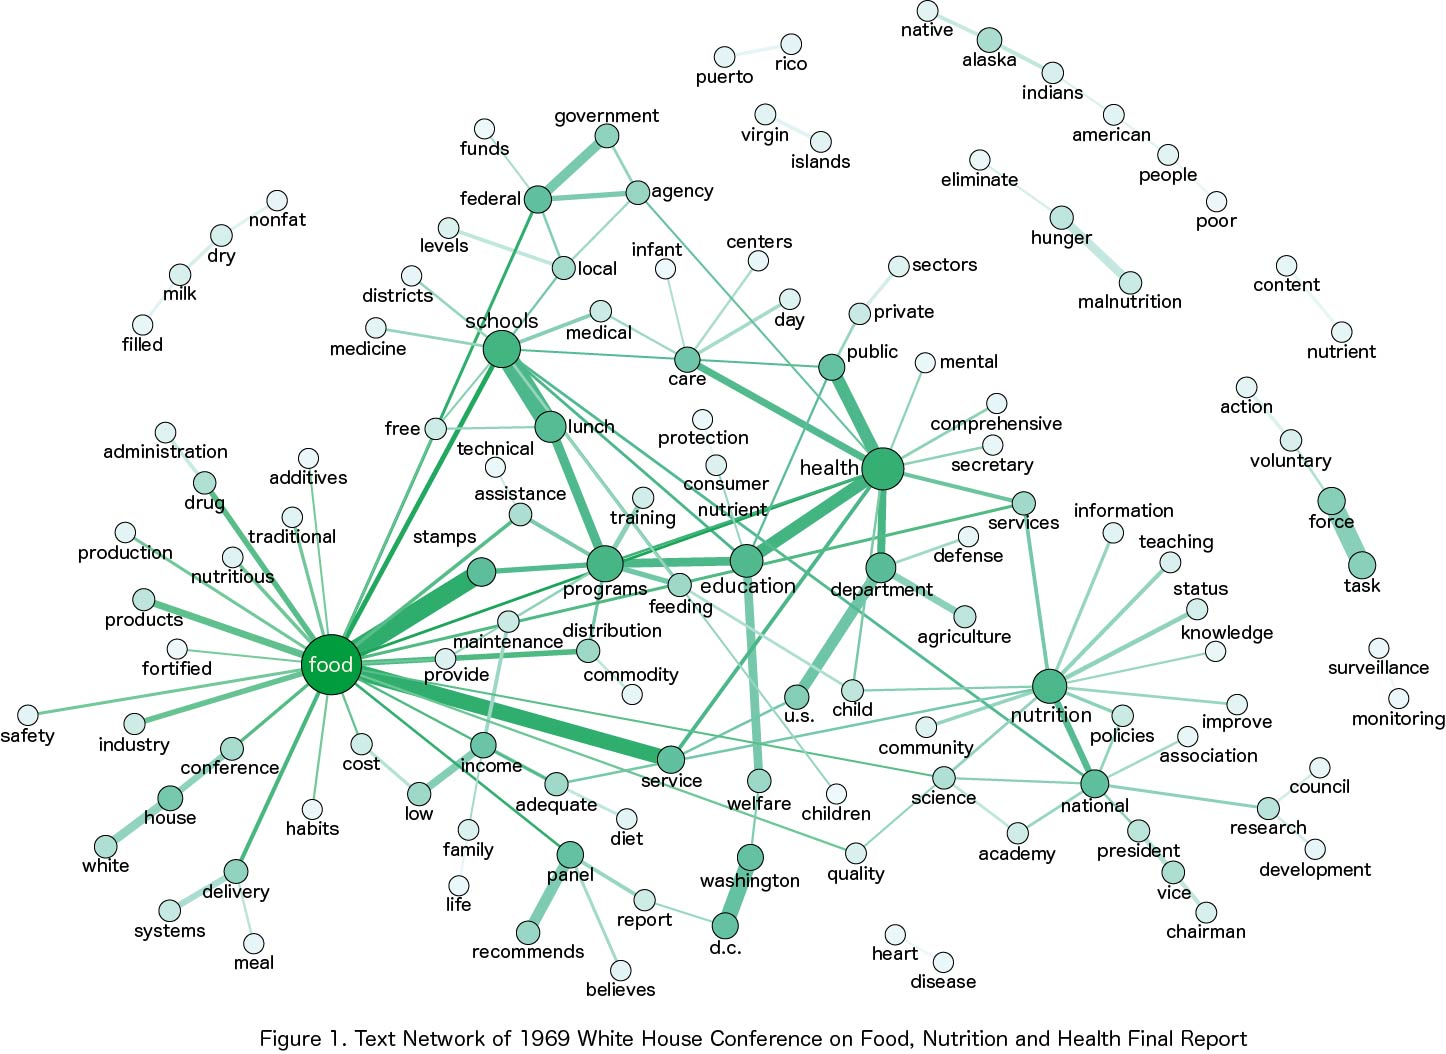 This is text network of 1969 White House Conference Report where important terms used in the text are represented as bubbles (or nodes) with connections (or ties) corresponding to how often those terms are used together in the report. While the size of each node tells us how many total connections a term has to other words in the text, the width of the ties illustrates the number of times terms were used next to each other in the final report.